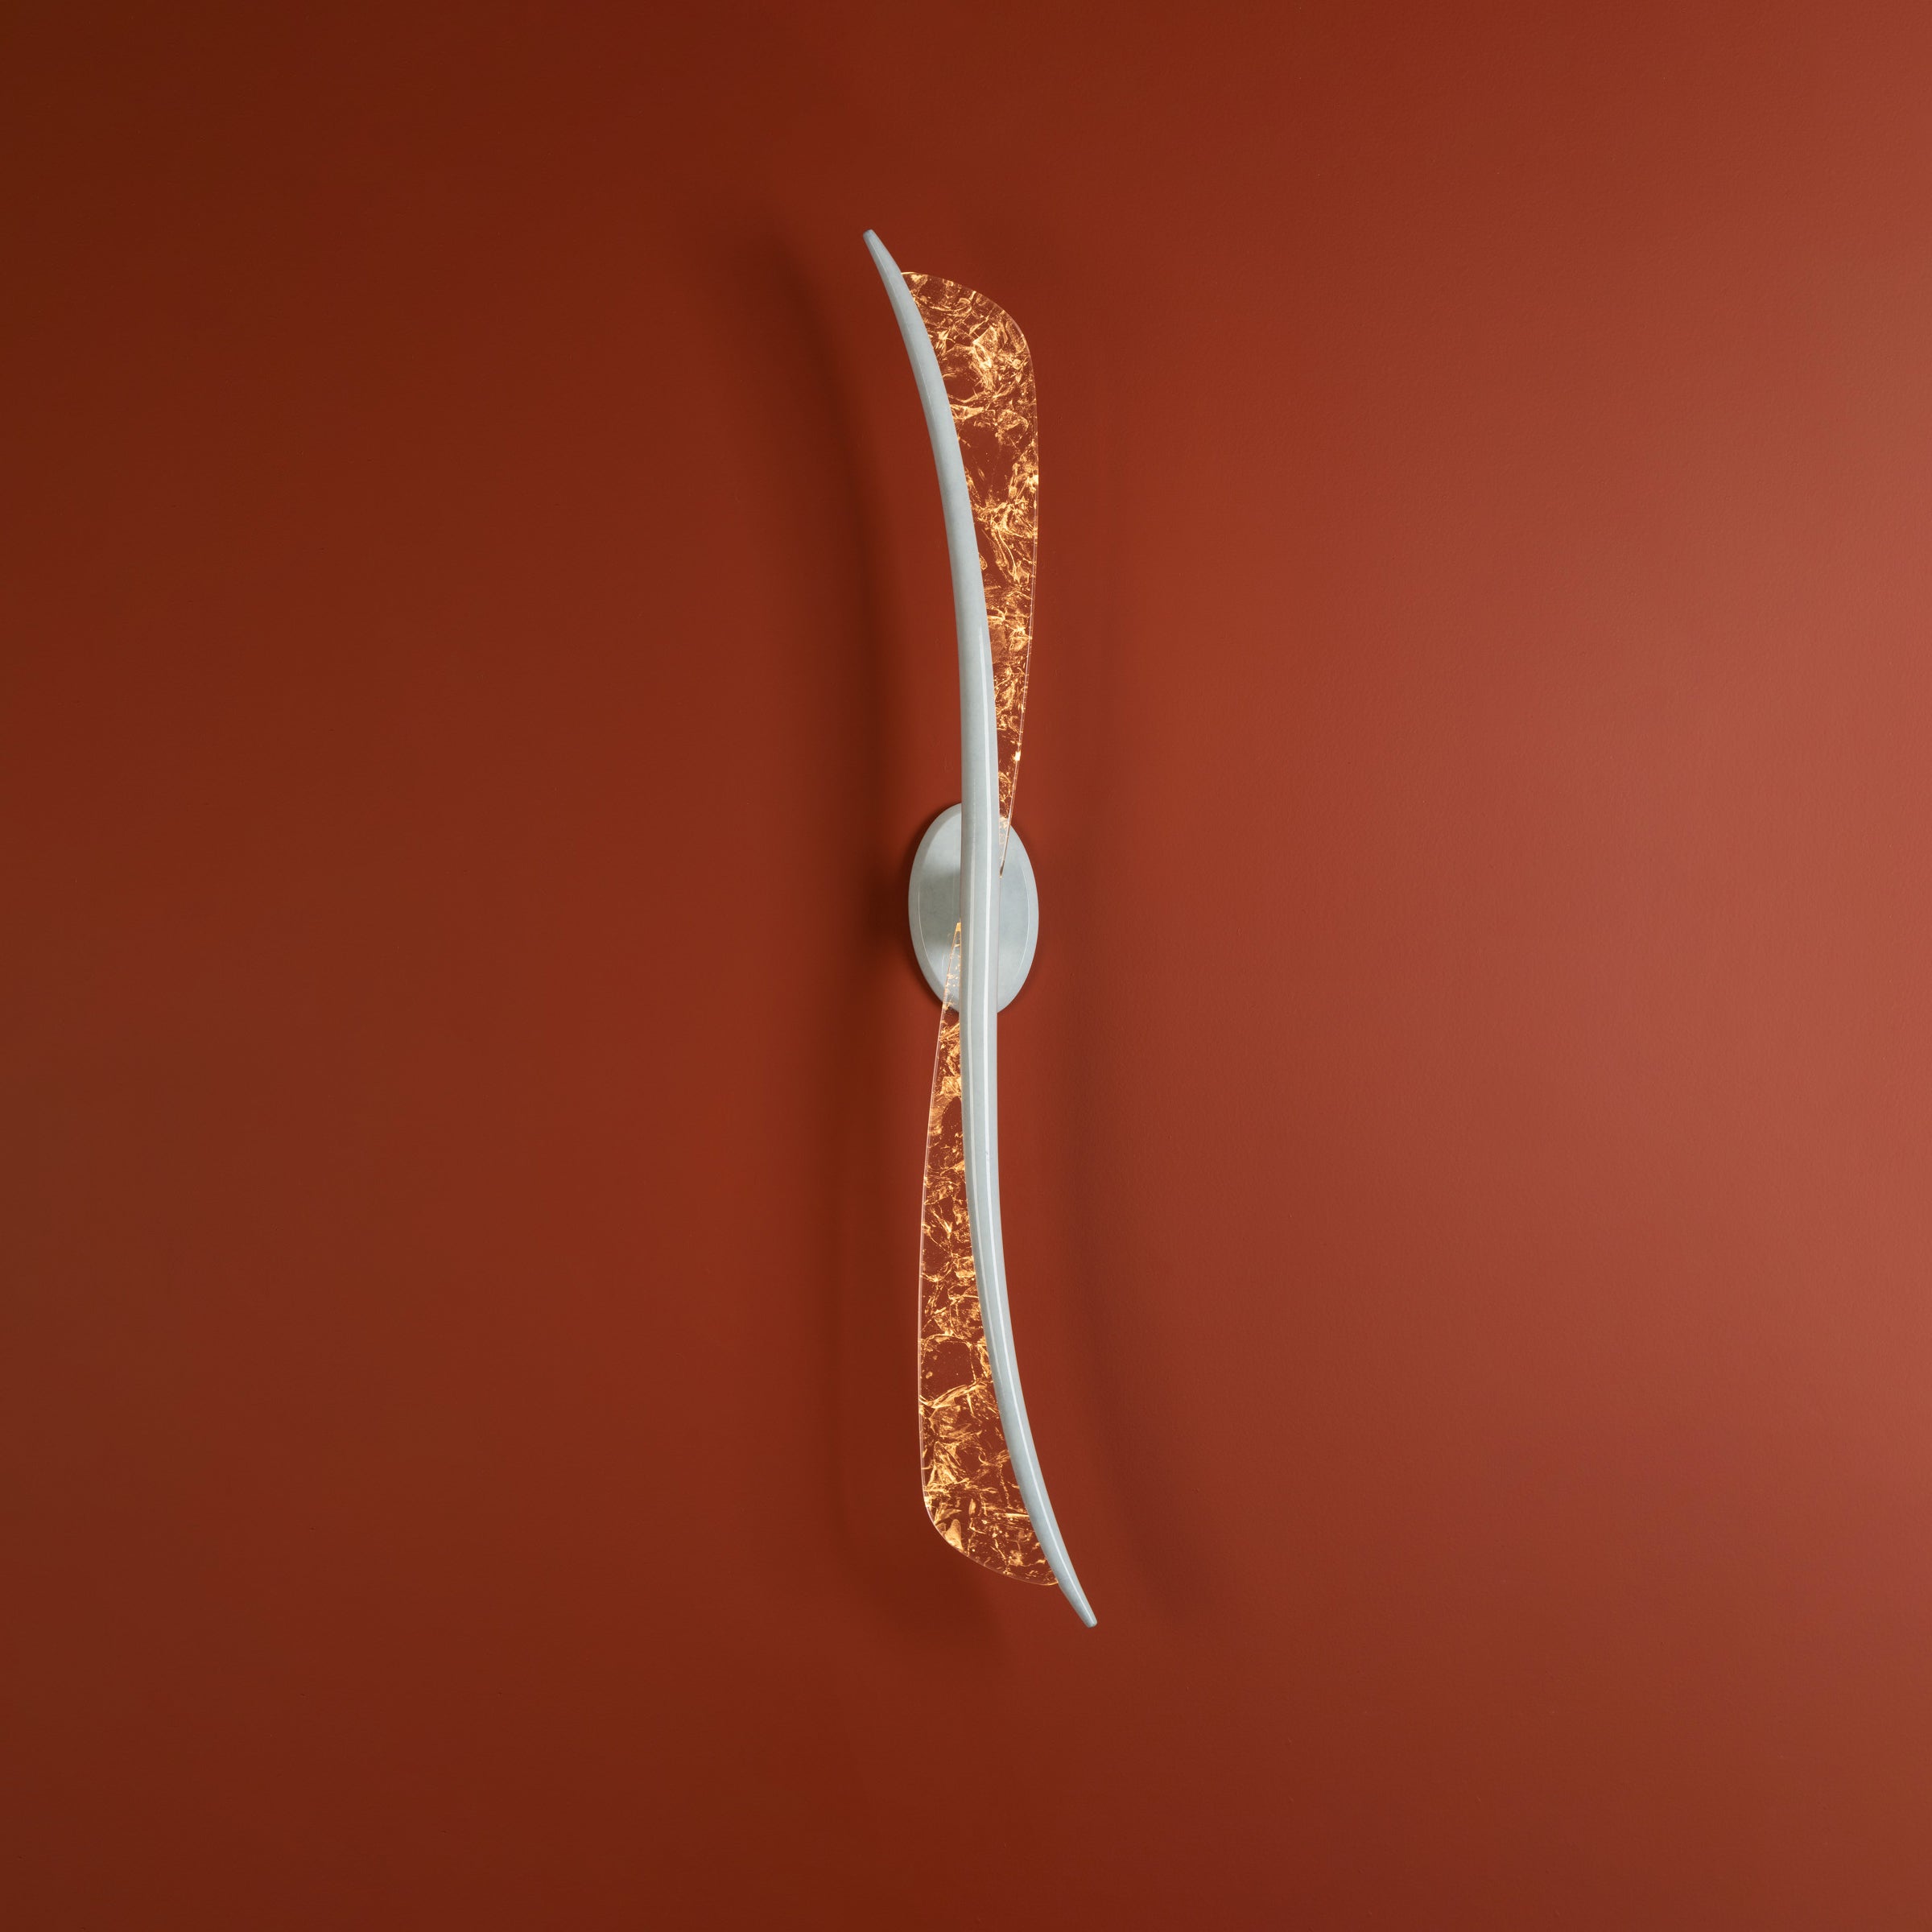 Avena Wall Light - Limited Edition